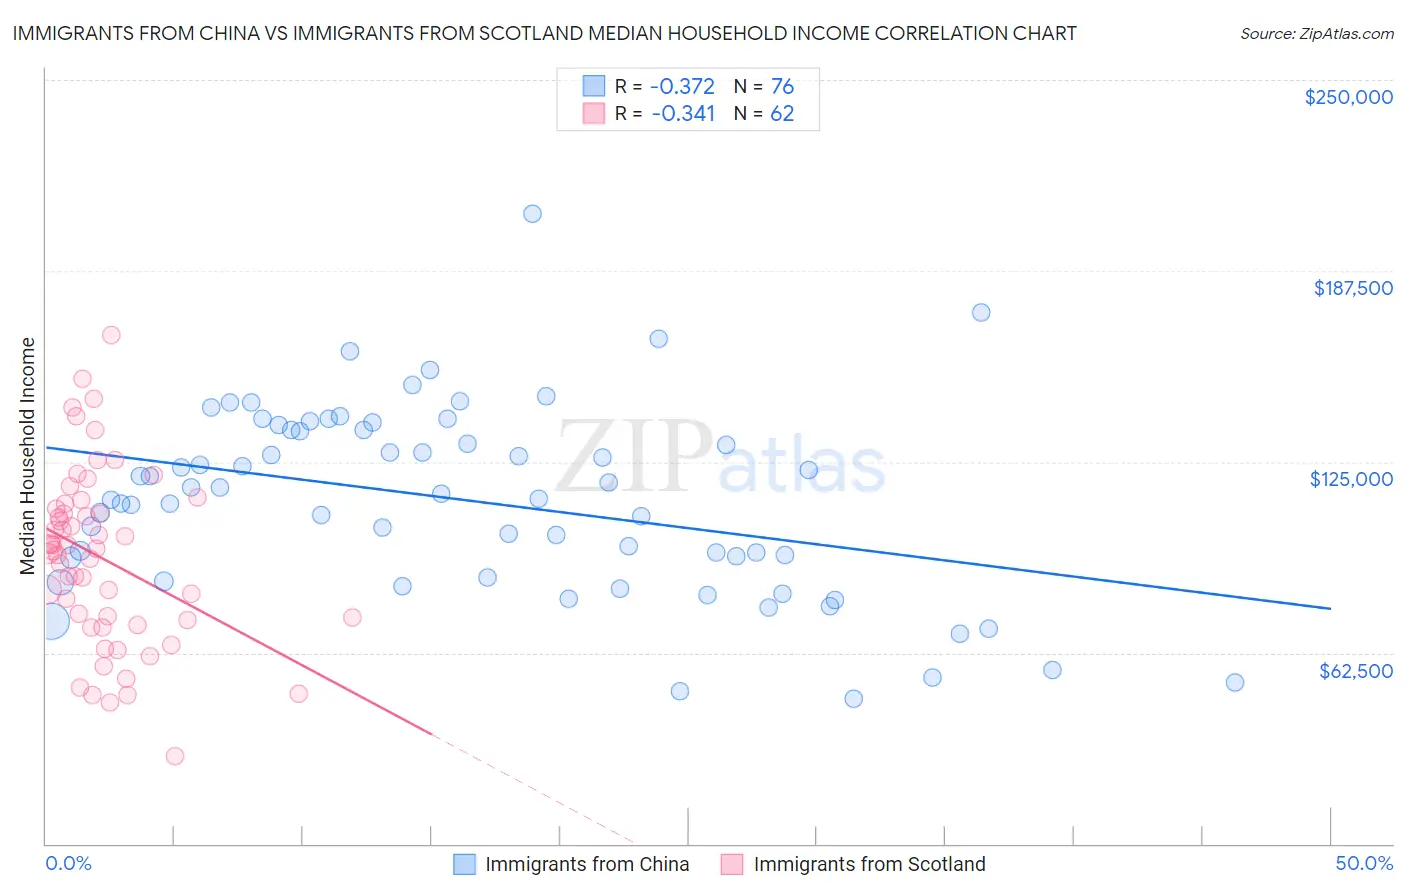 Immigrants from China vs Immigrants from Scotland Median Household Income